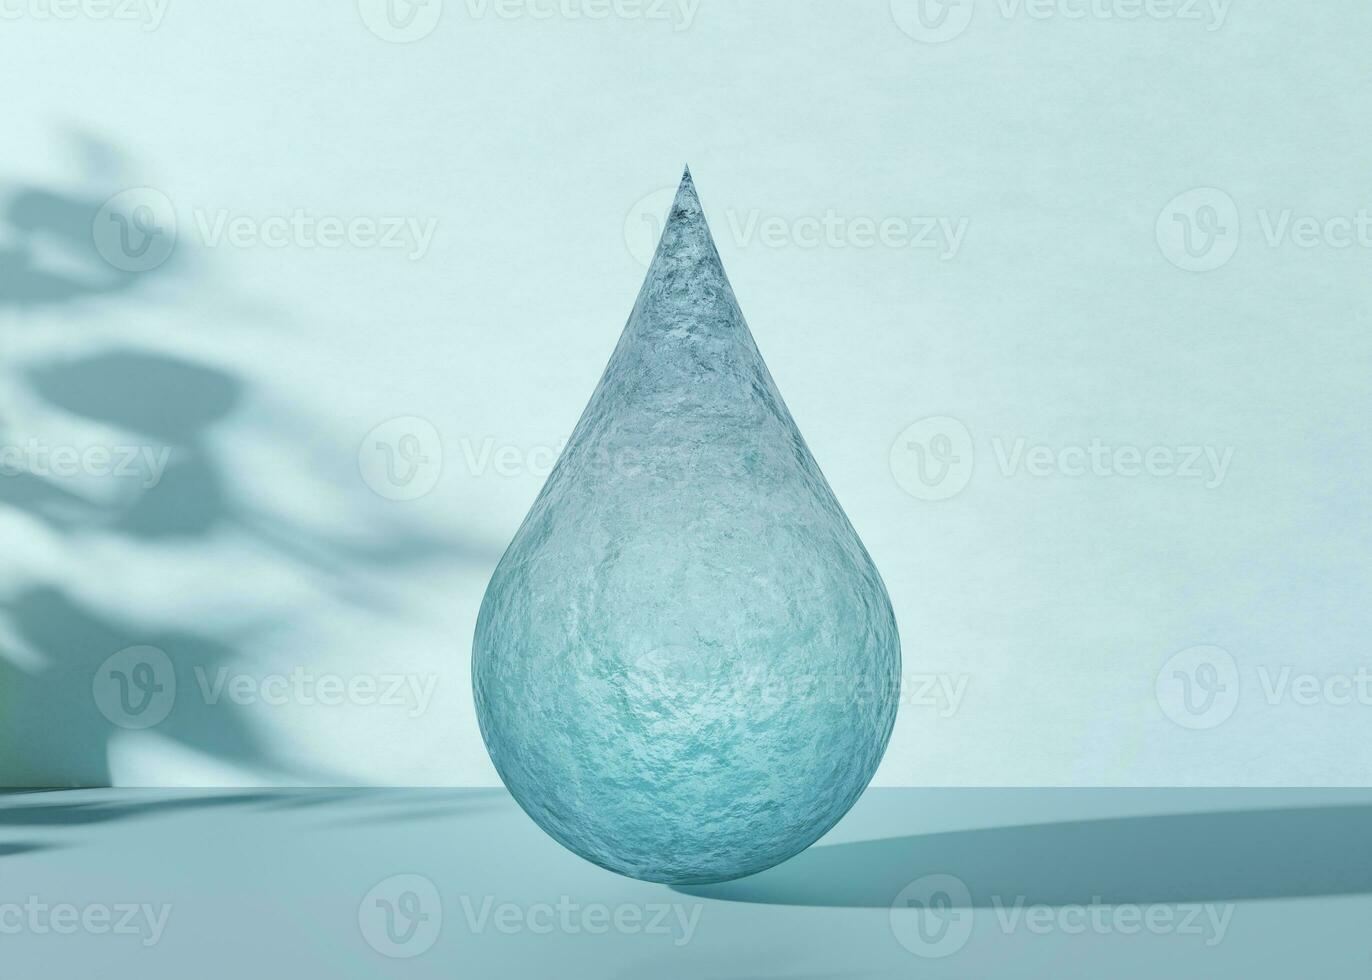 Realistic water drop on blue background. Close-up view. Aqua drop, liquid. Save water - ecology concept. Importance of water for health and nature. 3D rendering. photo